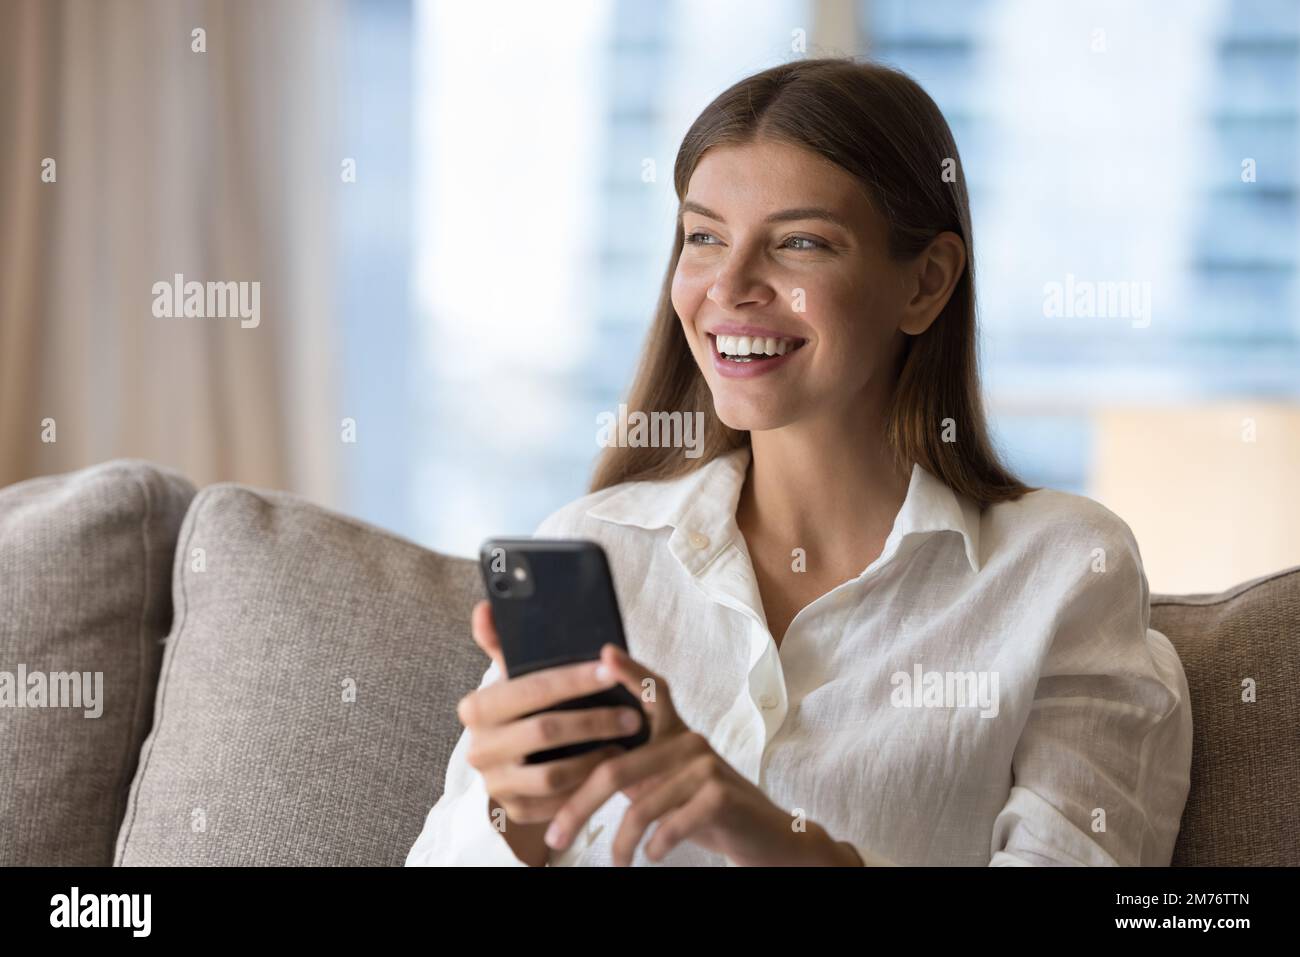 Attractive young woman resting on sofa with modern smartphone Stock Photo